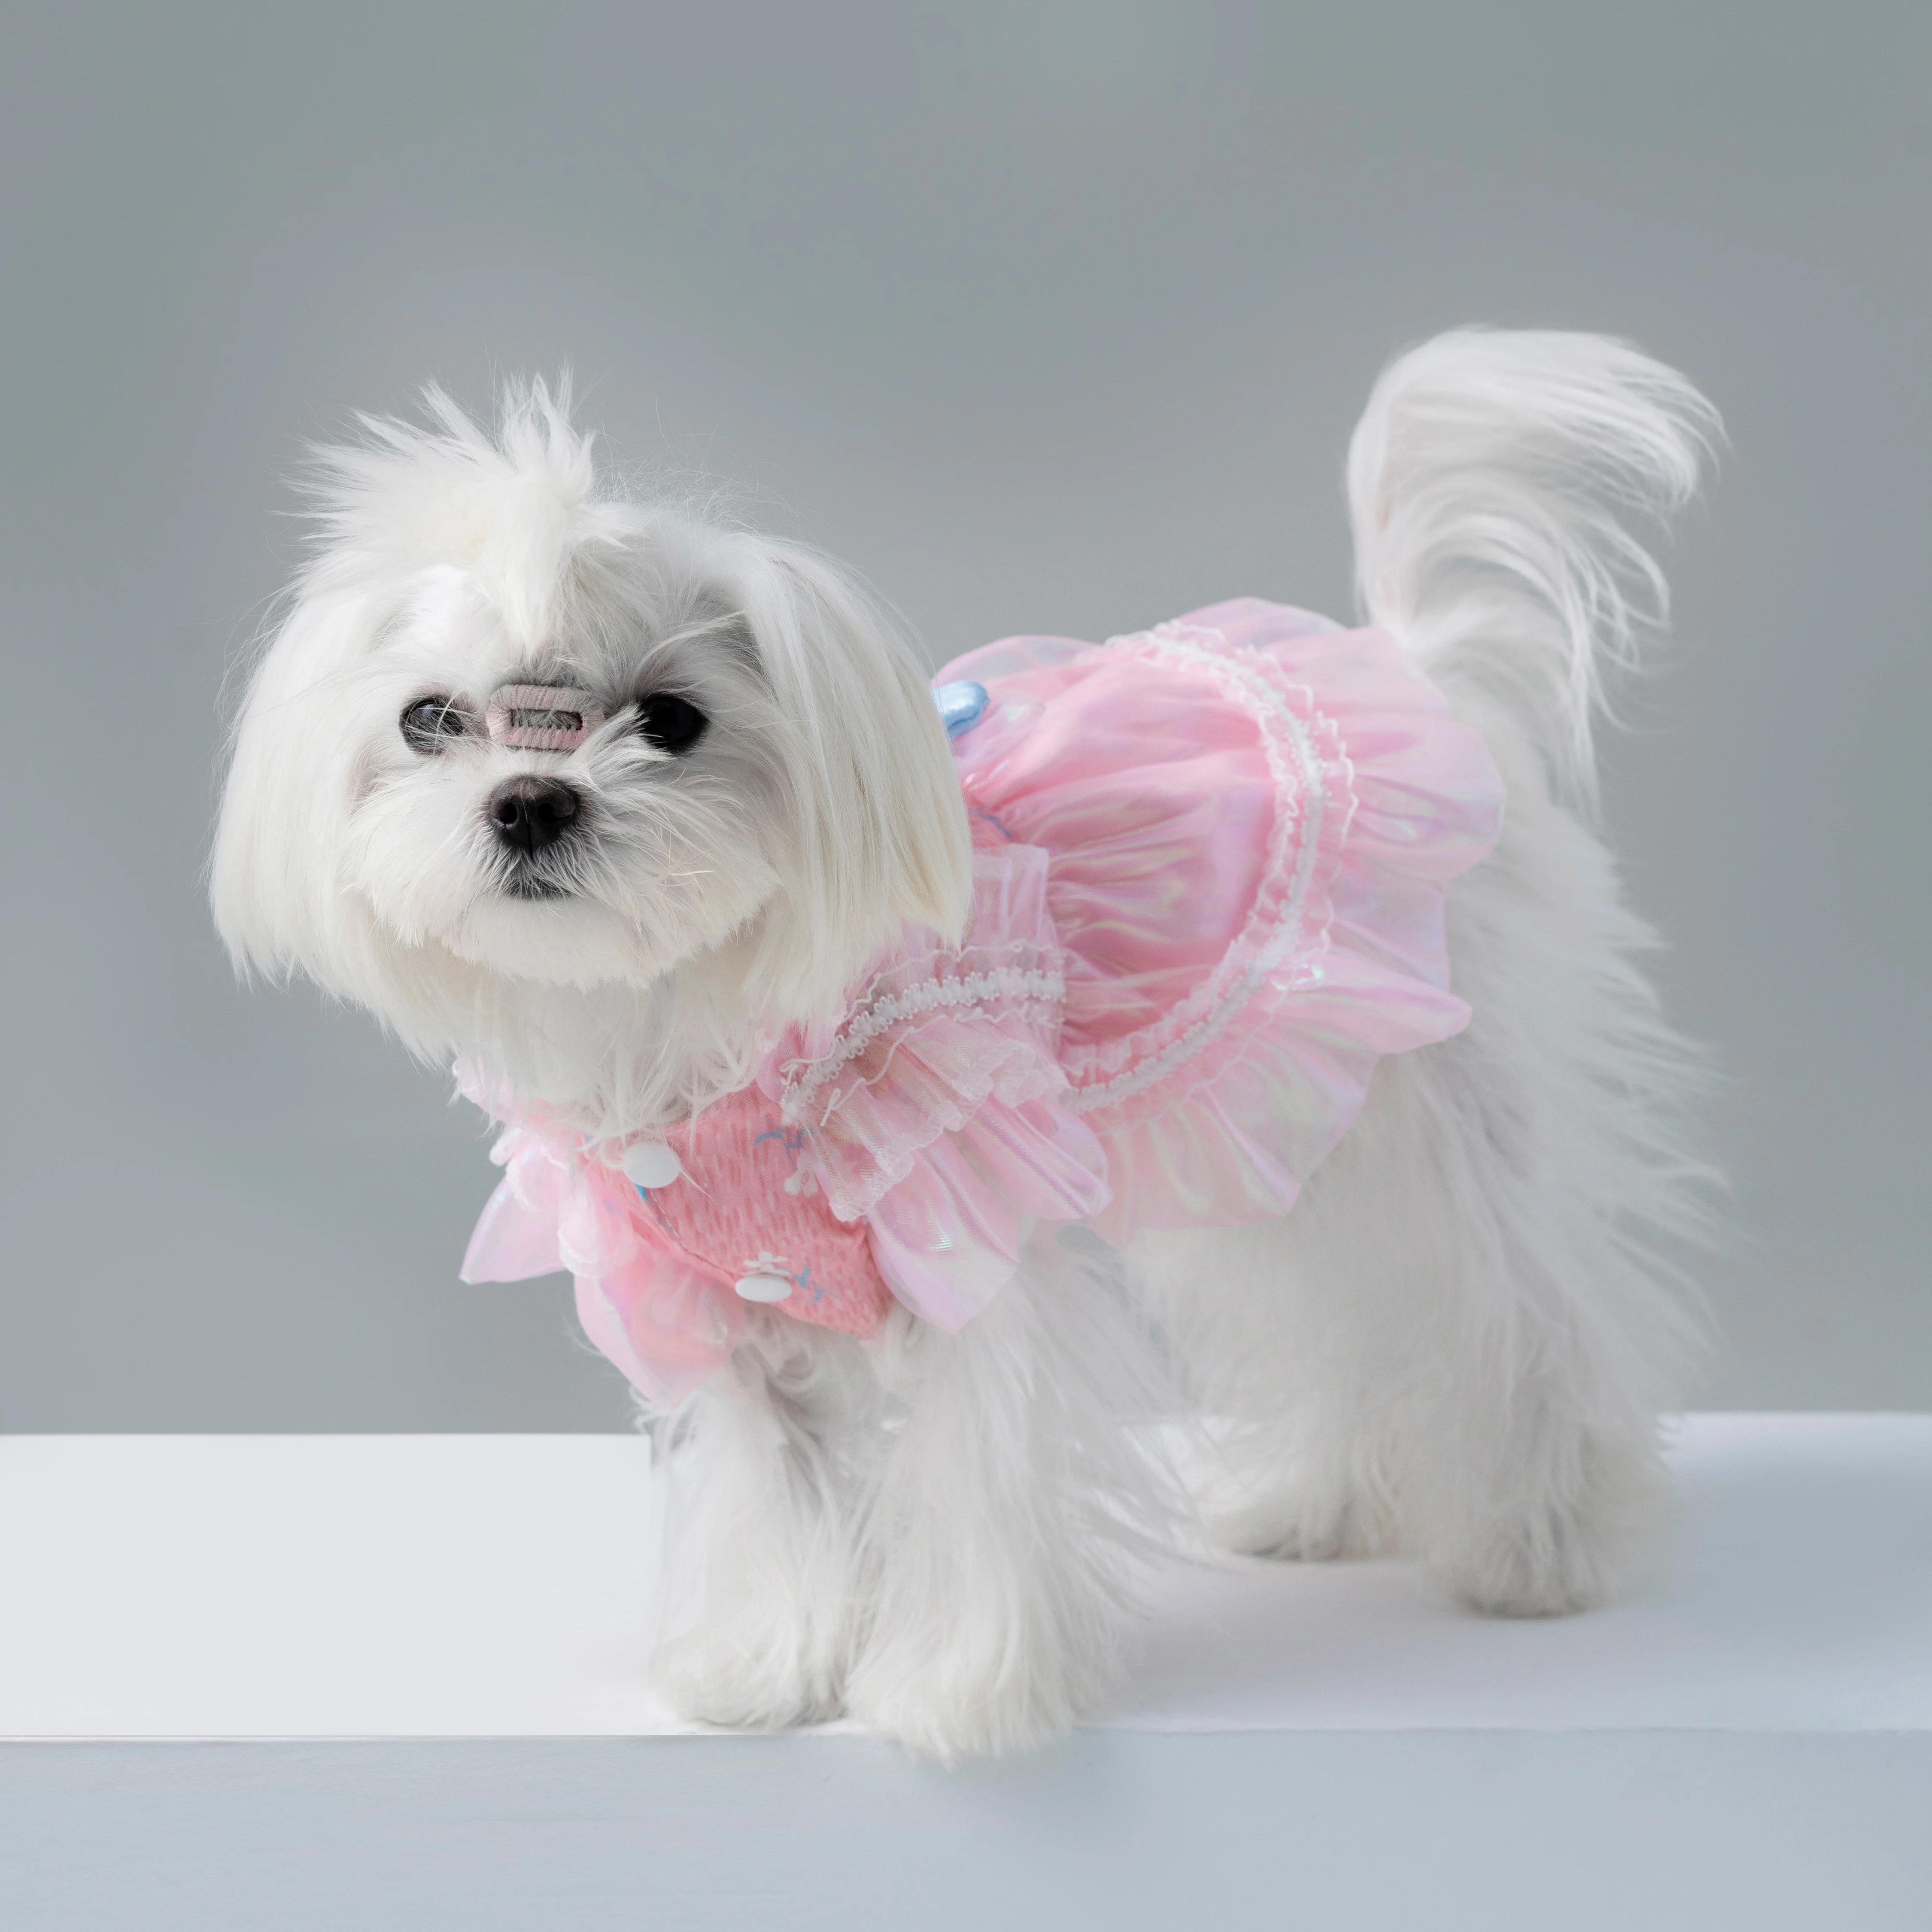 

Dog & Cat Clothes, Cotton Pink Pet Dress with Lace and Bow, For All Seasons, Mesh Skirt for Kitten, Puppy, Teddy, Chihuahua